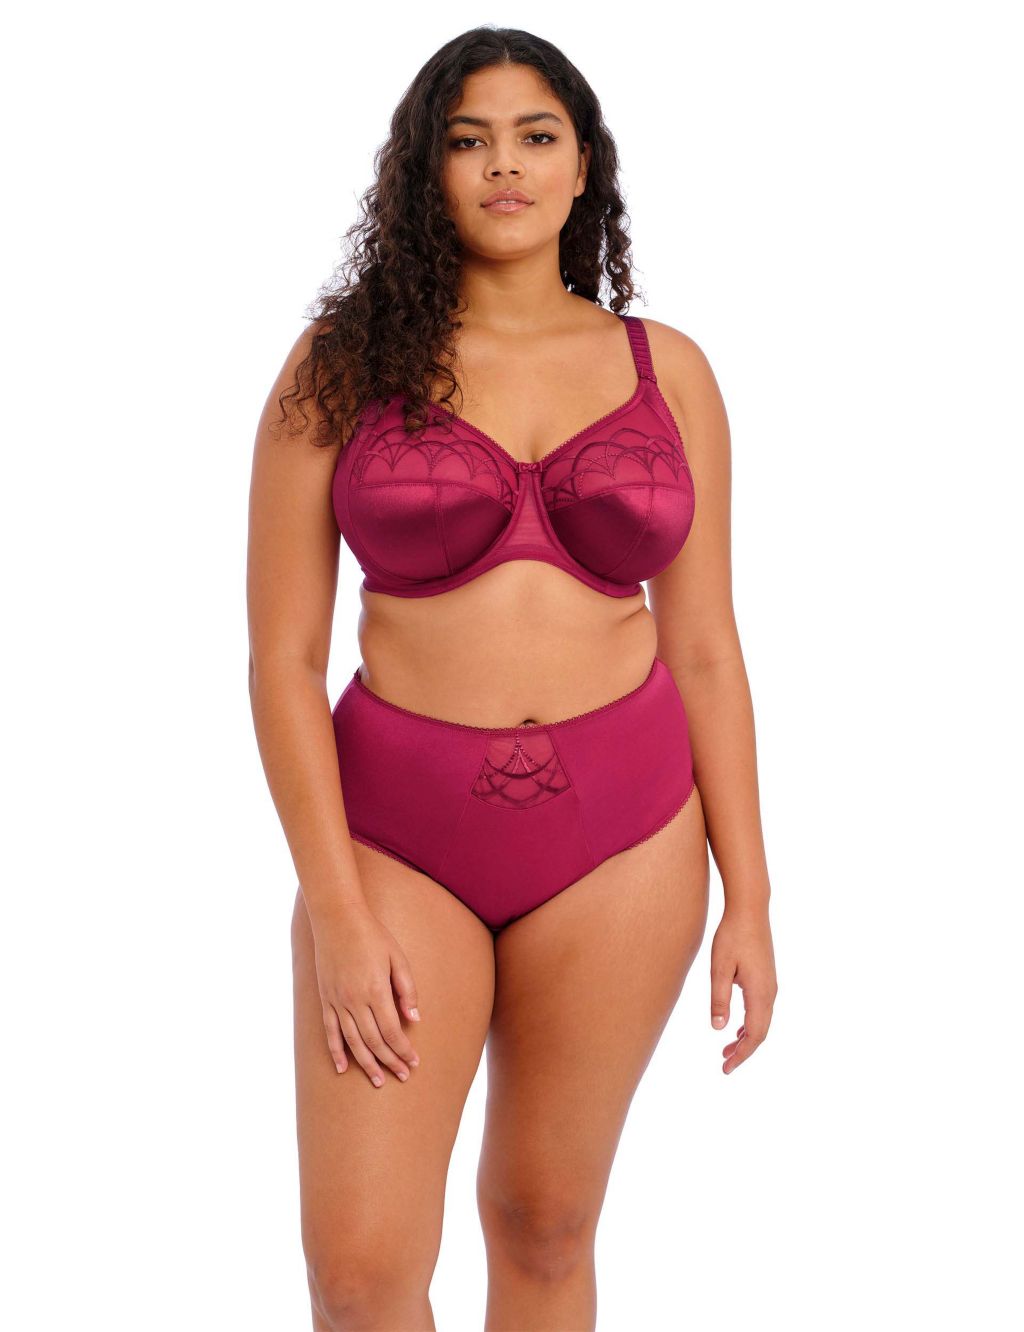 Cate Wired Full Cup Bra DD-K image 5